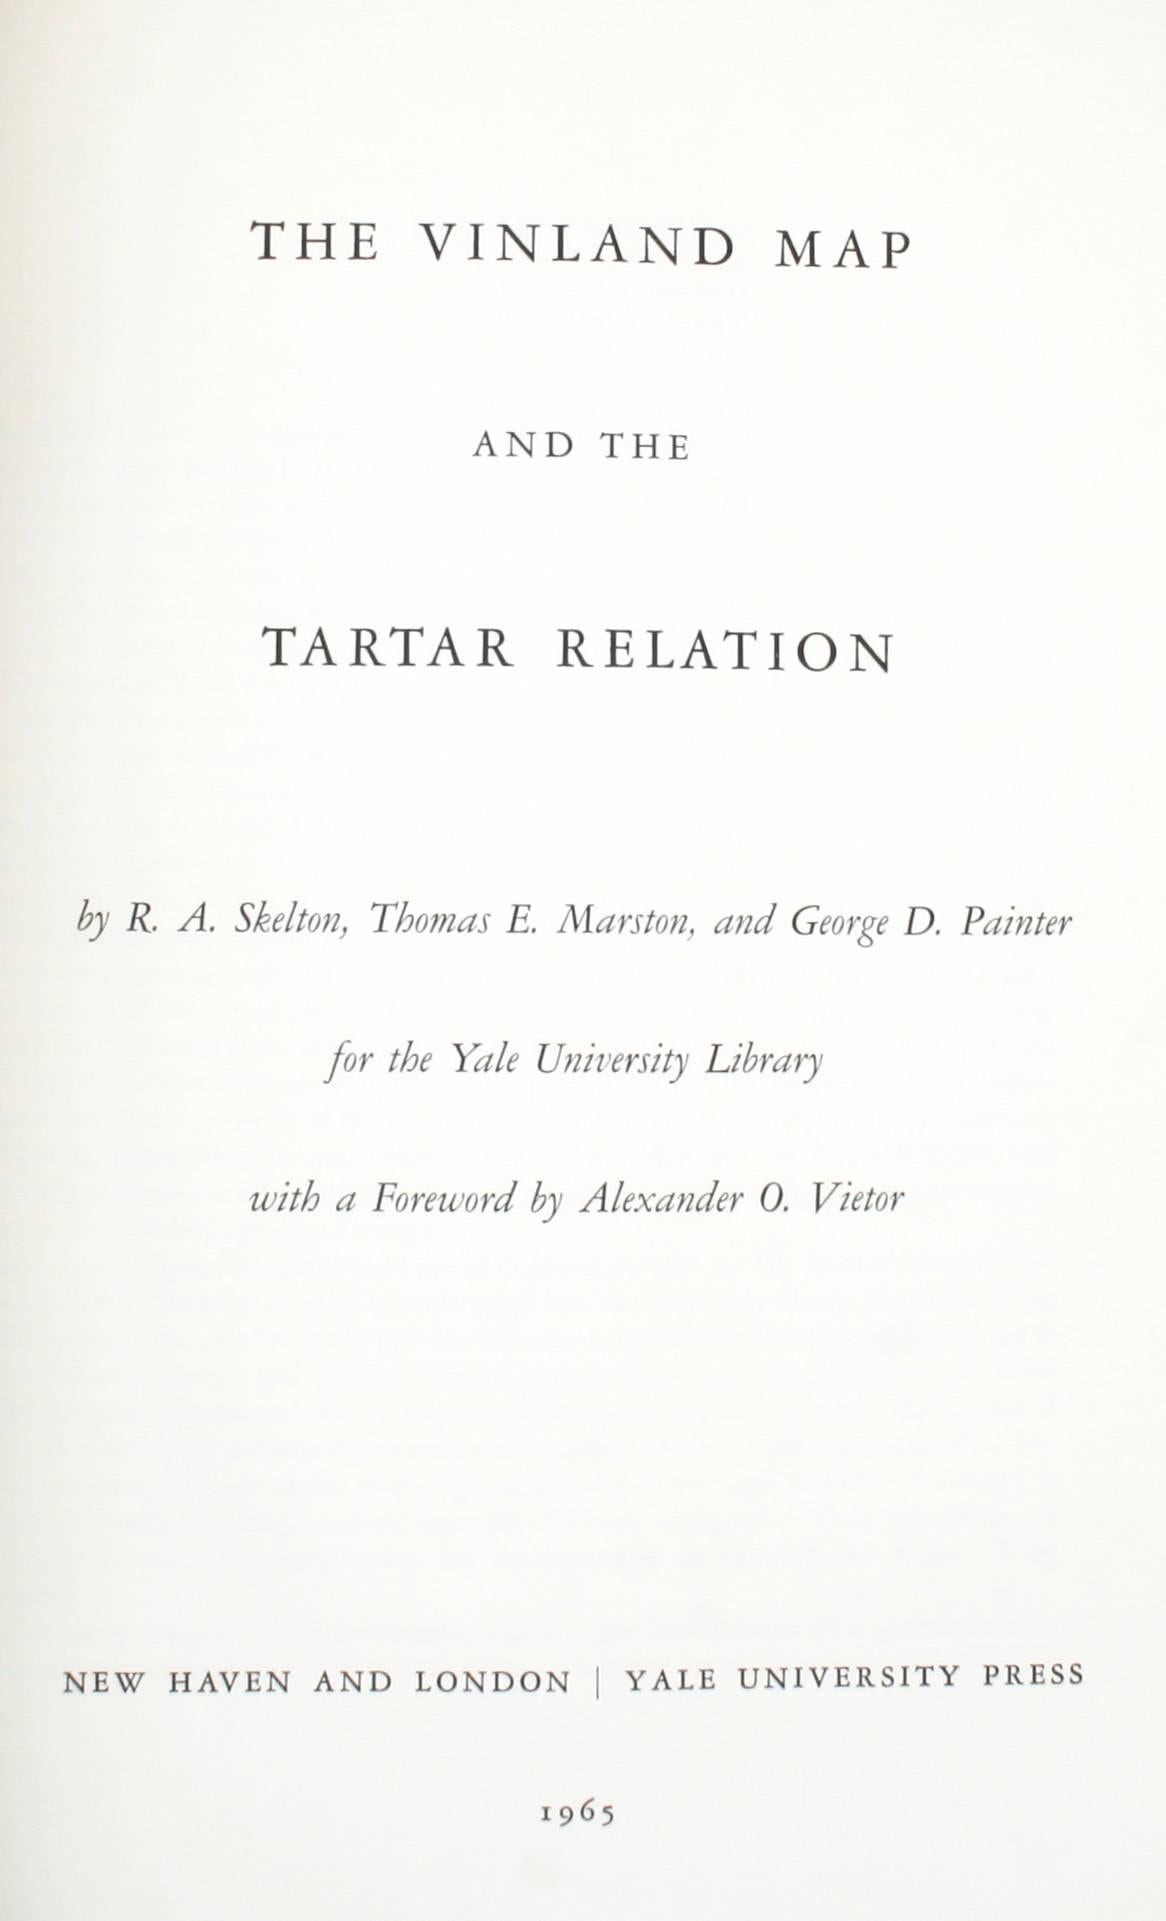 The Vinland Map and the Tartar Relation. New Haven: Yale University Press, 1965. First edition third printing hardcover with dust jacket. 291 pp. A historical cartography of the Vinland Map which dated to about A.D. 1440, at least fifty years before